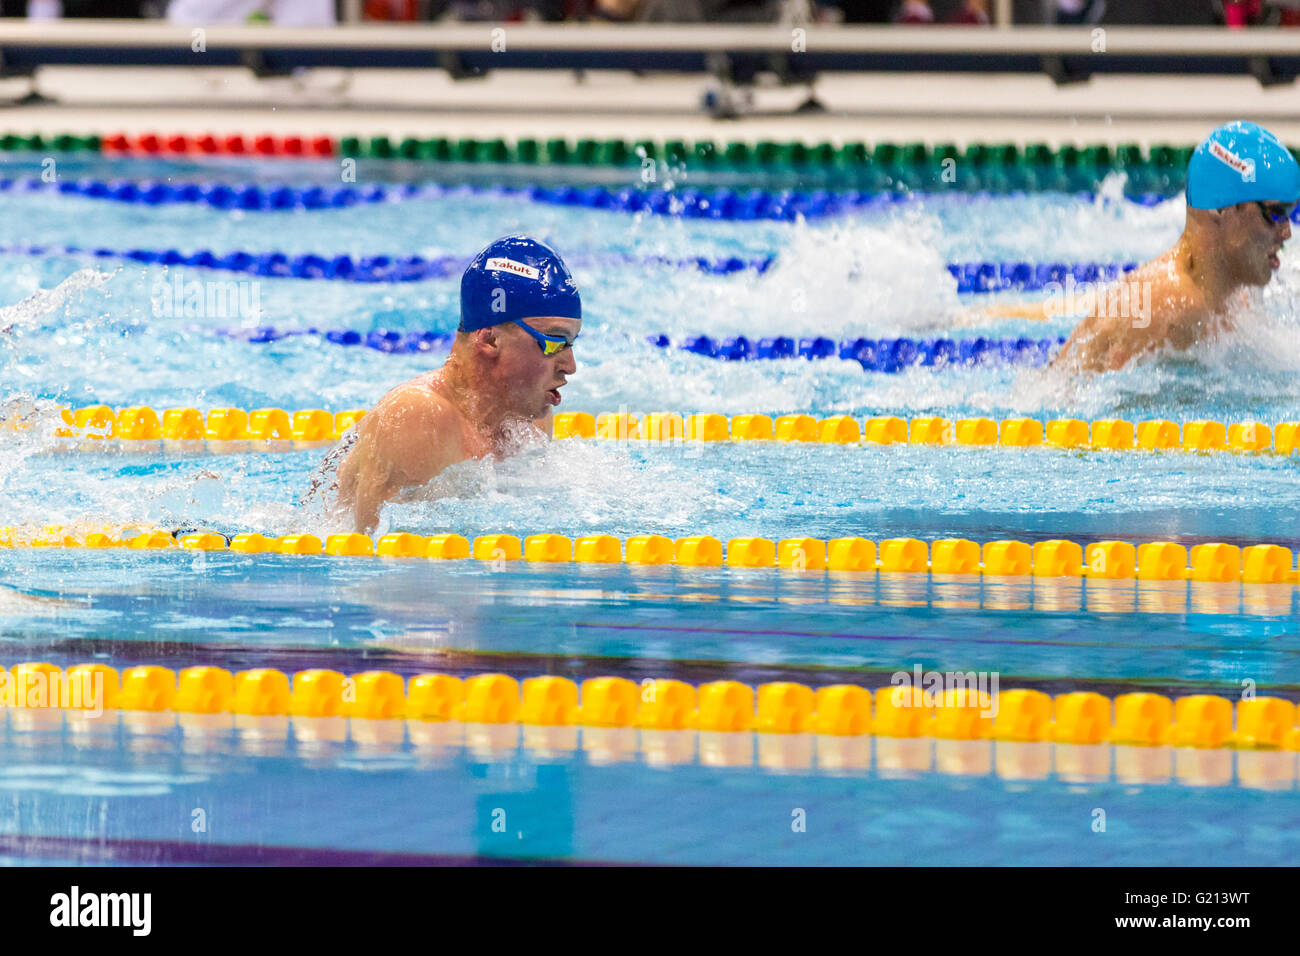 Aquatics Centre, London, UK, 21st May 2016. European Swimming Championships. Men's 50m breaststroke final. Adam Peaty during the race. British favourite Adam Peaty wins the gold medal in 26.66, with 2nd British swimmer Ross Murdoch taking Bronze in 27.31, whilst silver goes to Slovenian Peter John Stevens in 27.09. Credit:  Imageplotter News and Sports/Alamy Live News Stock Photo